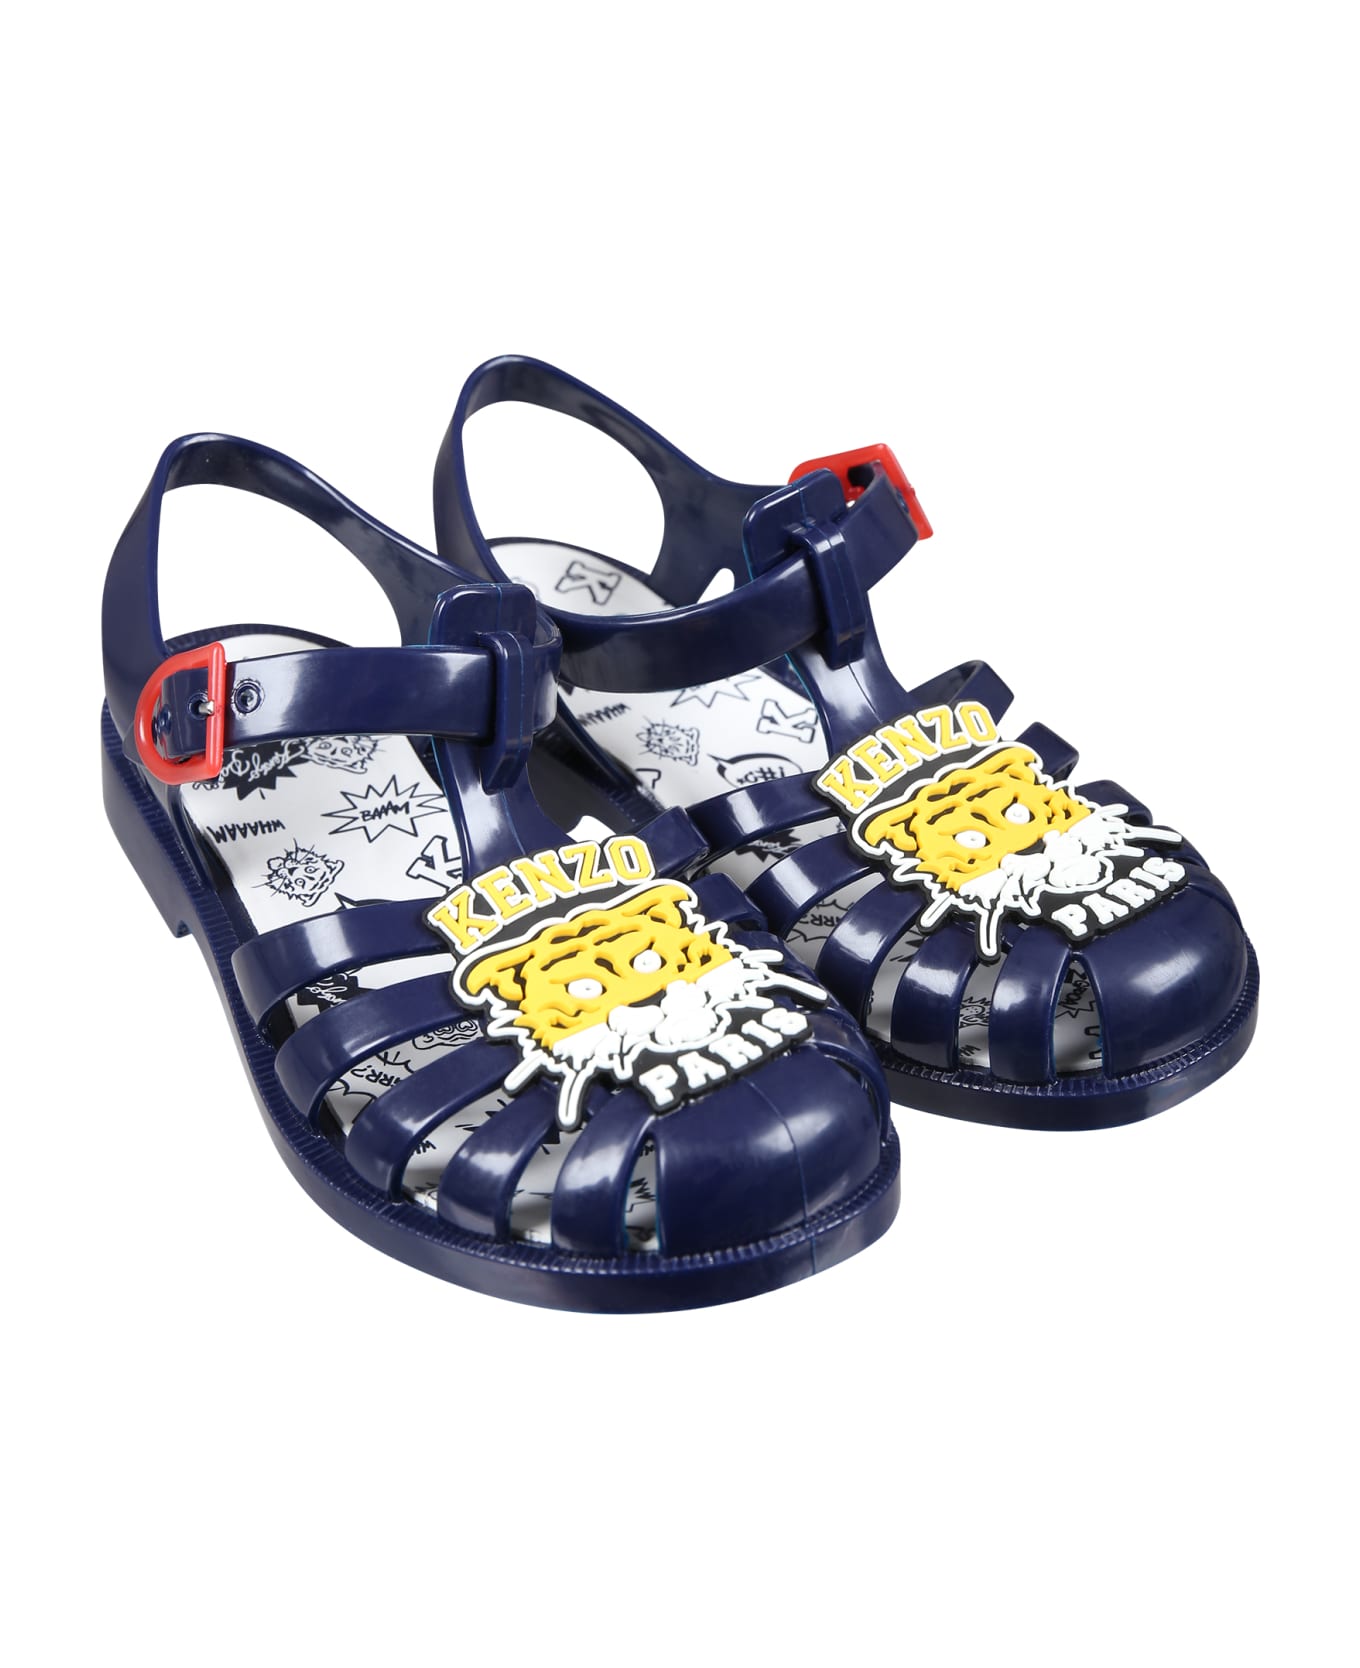 Kenzo Kids Blue Sandals For Boy With Tiger - Blu